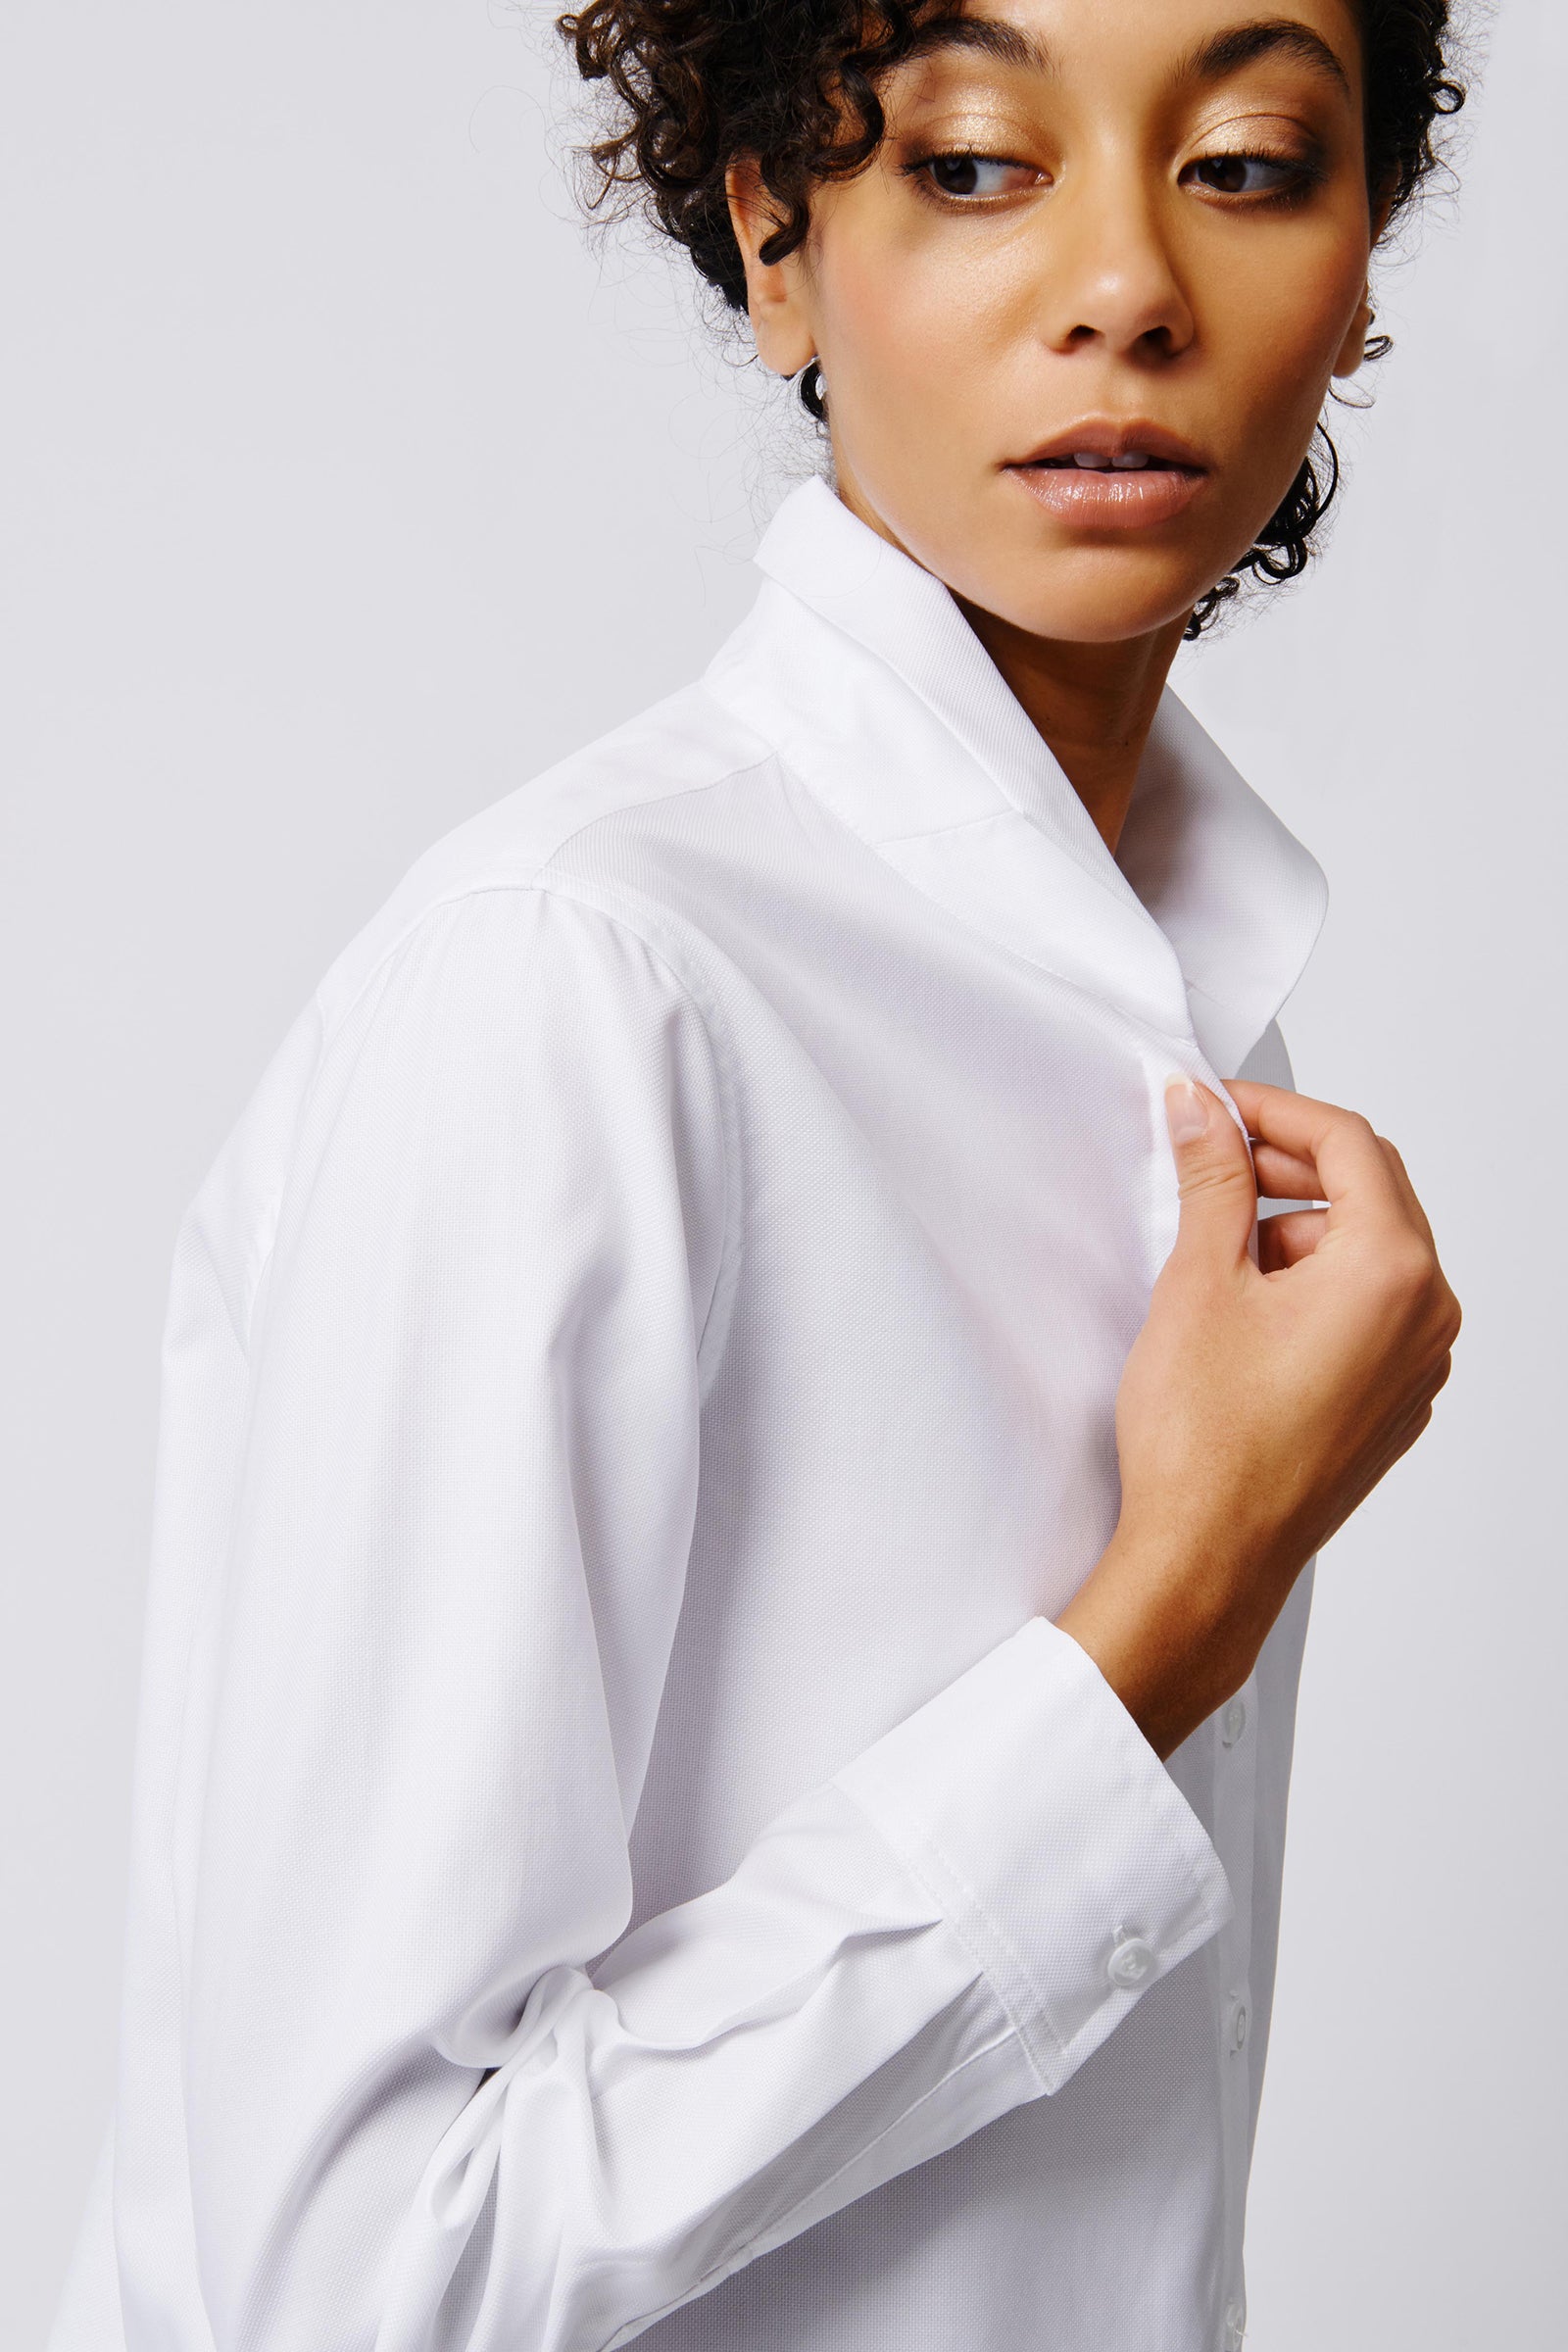 Kal Rieman Ginna Box Pleat Shirt in White Pinpoint Oxford on Model Side View Crop